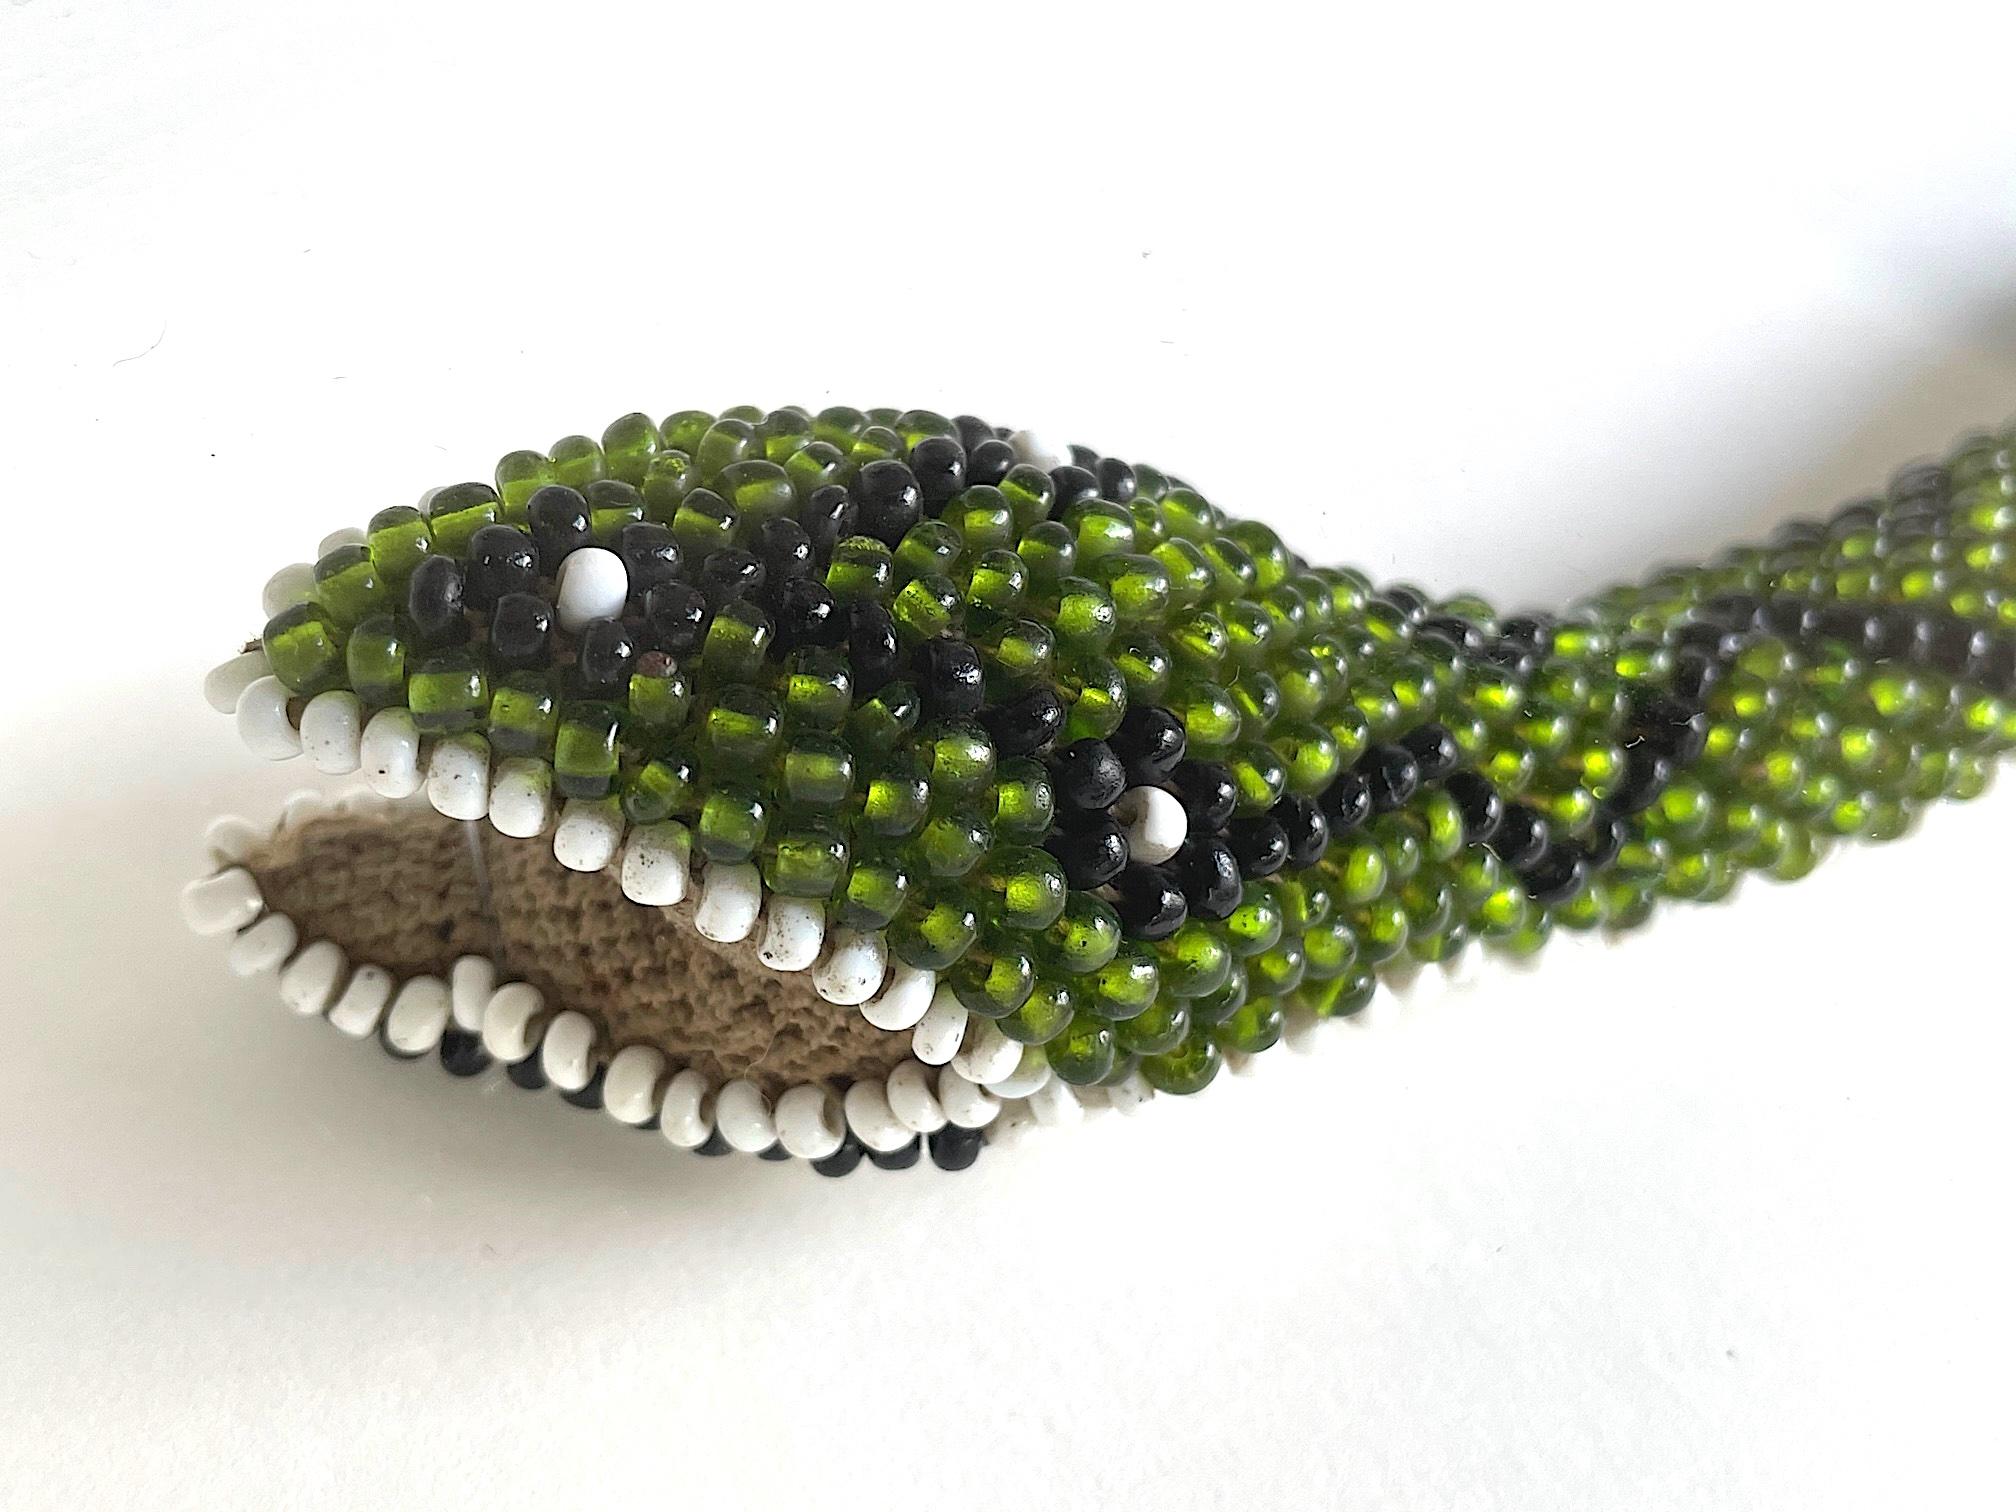 Early 20th Century Stunning Large Framed Green Beaded Snake Made by WW1 Turkish Prisoners of War